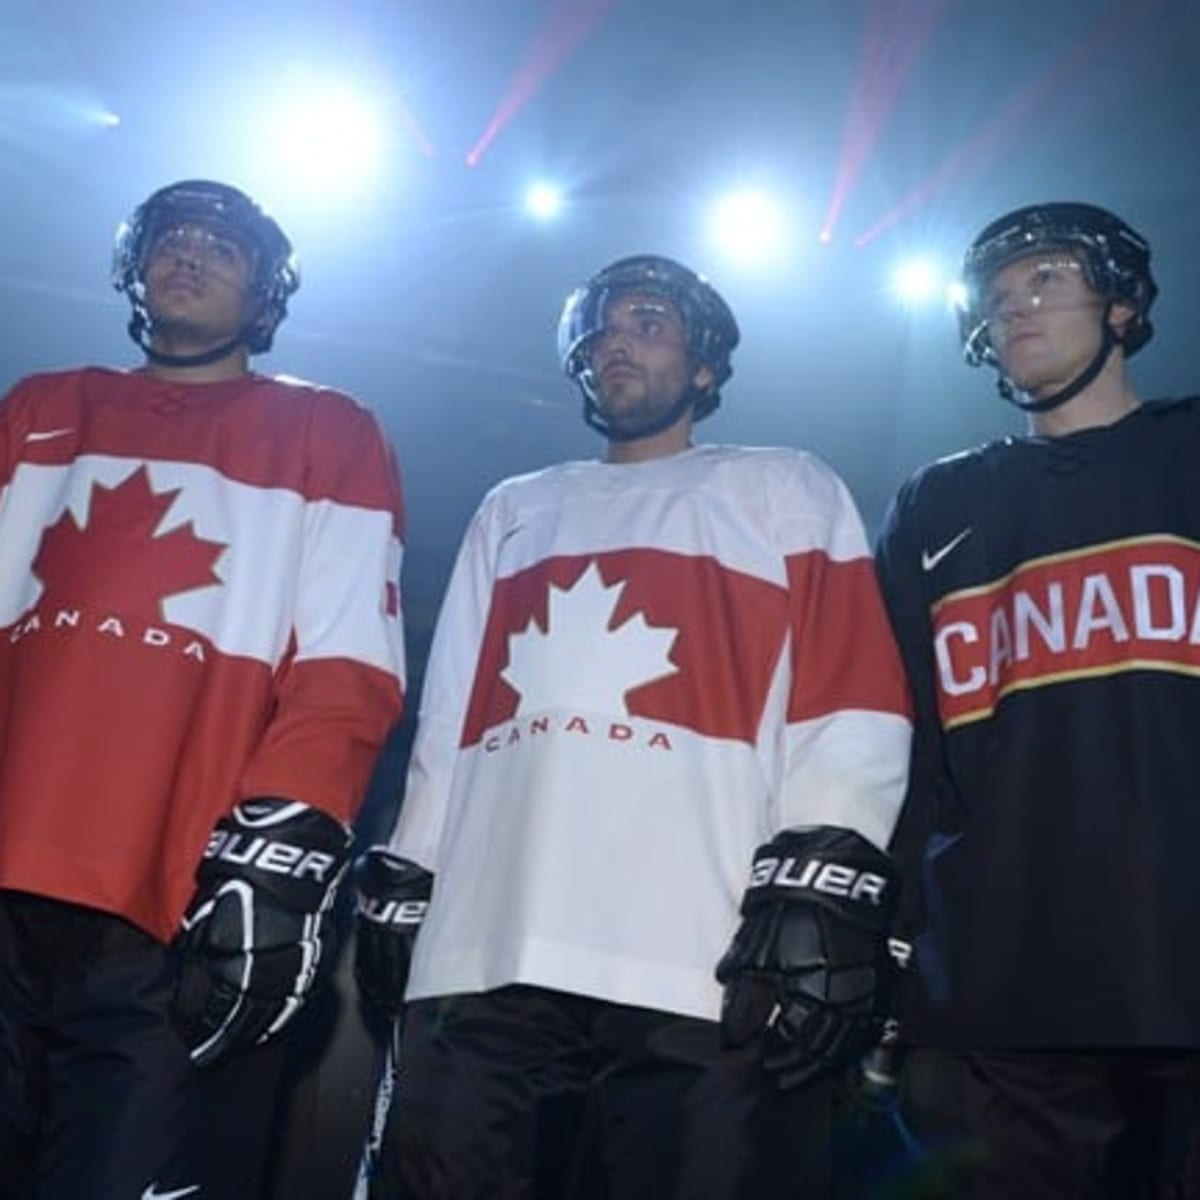 canada olympic jersey 2014